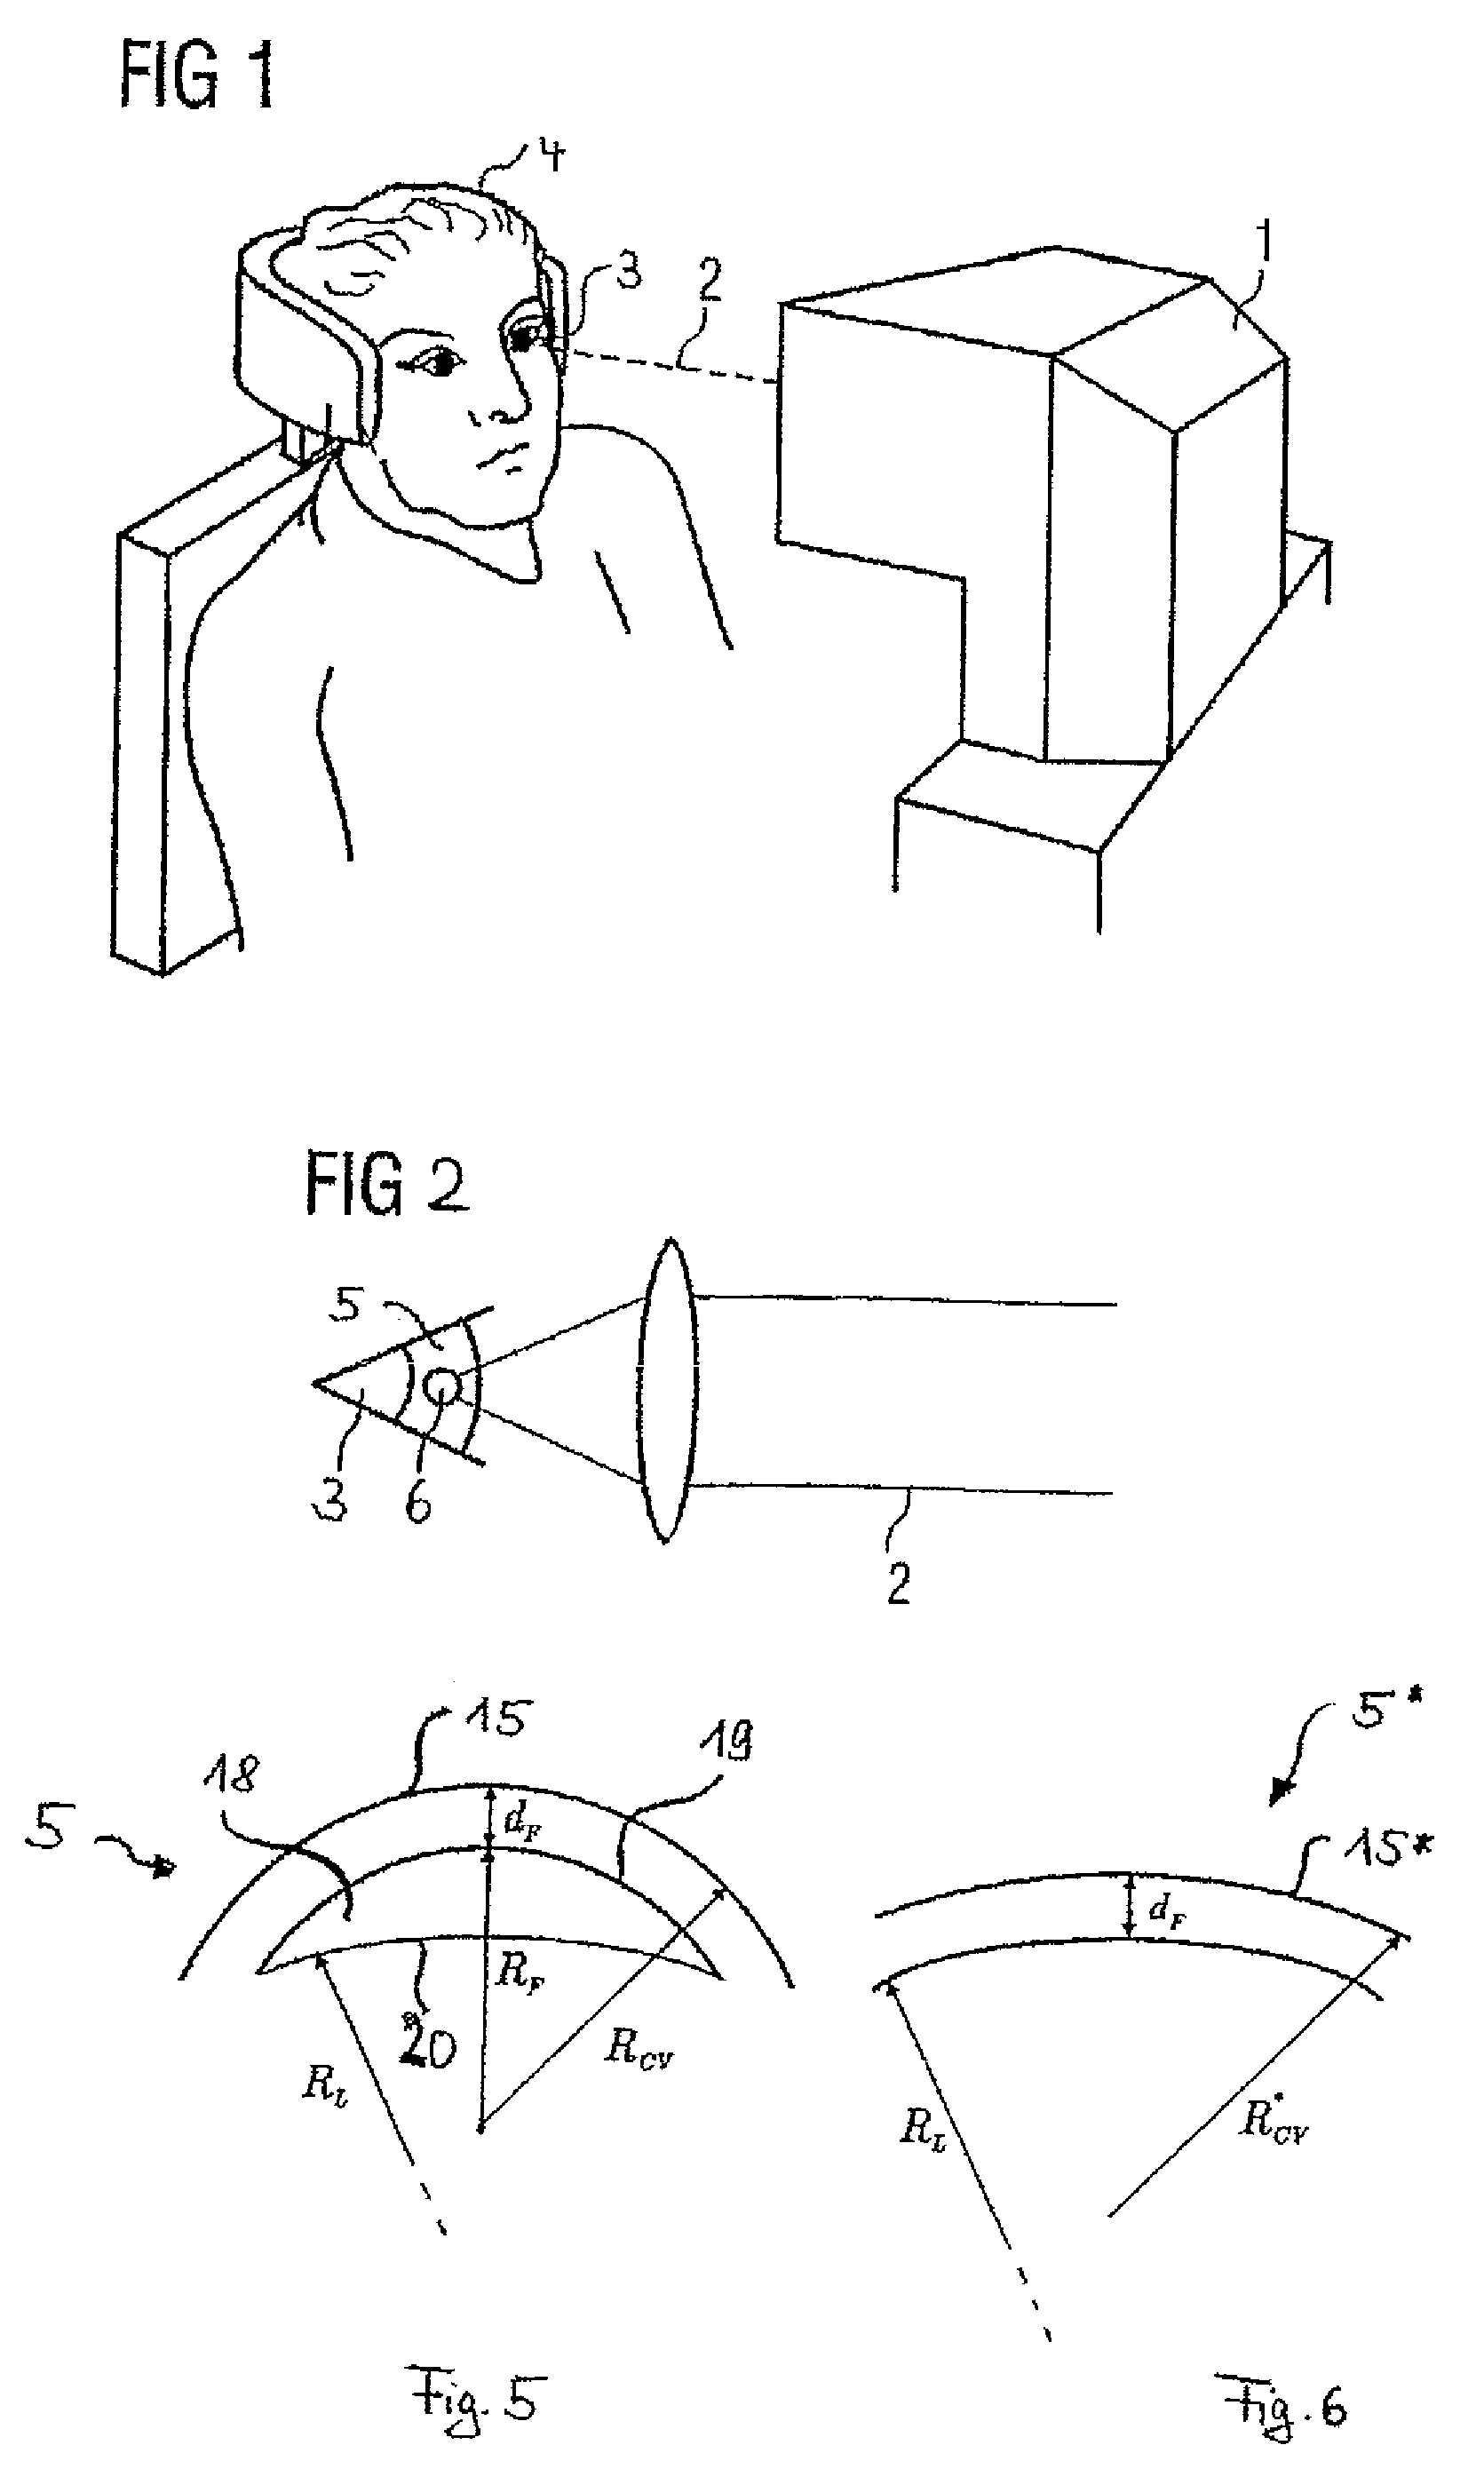 Treatment apparatus for surgical correction of defective eyesight, method of generating control data therefore, and method for surgical correction of defective eyesight